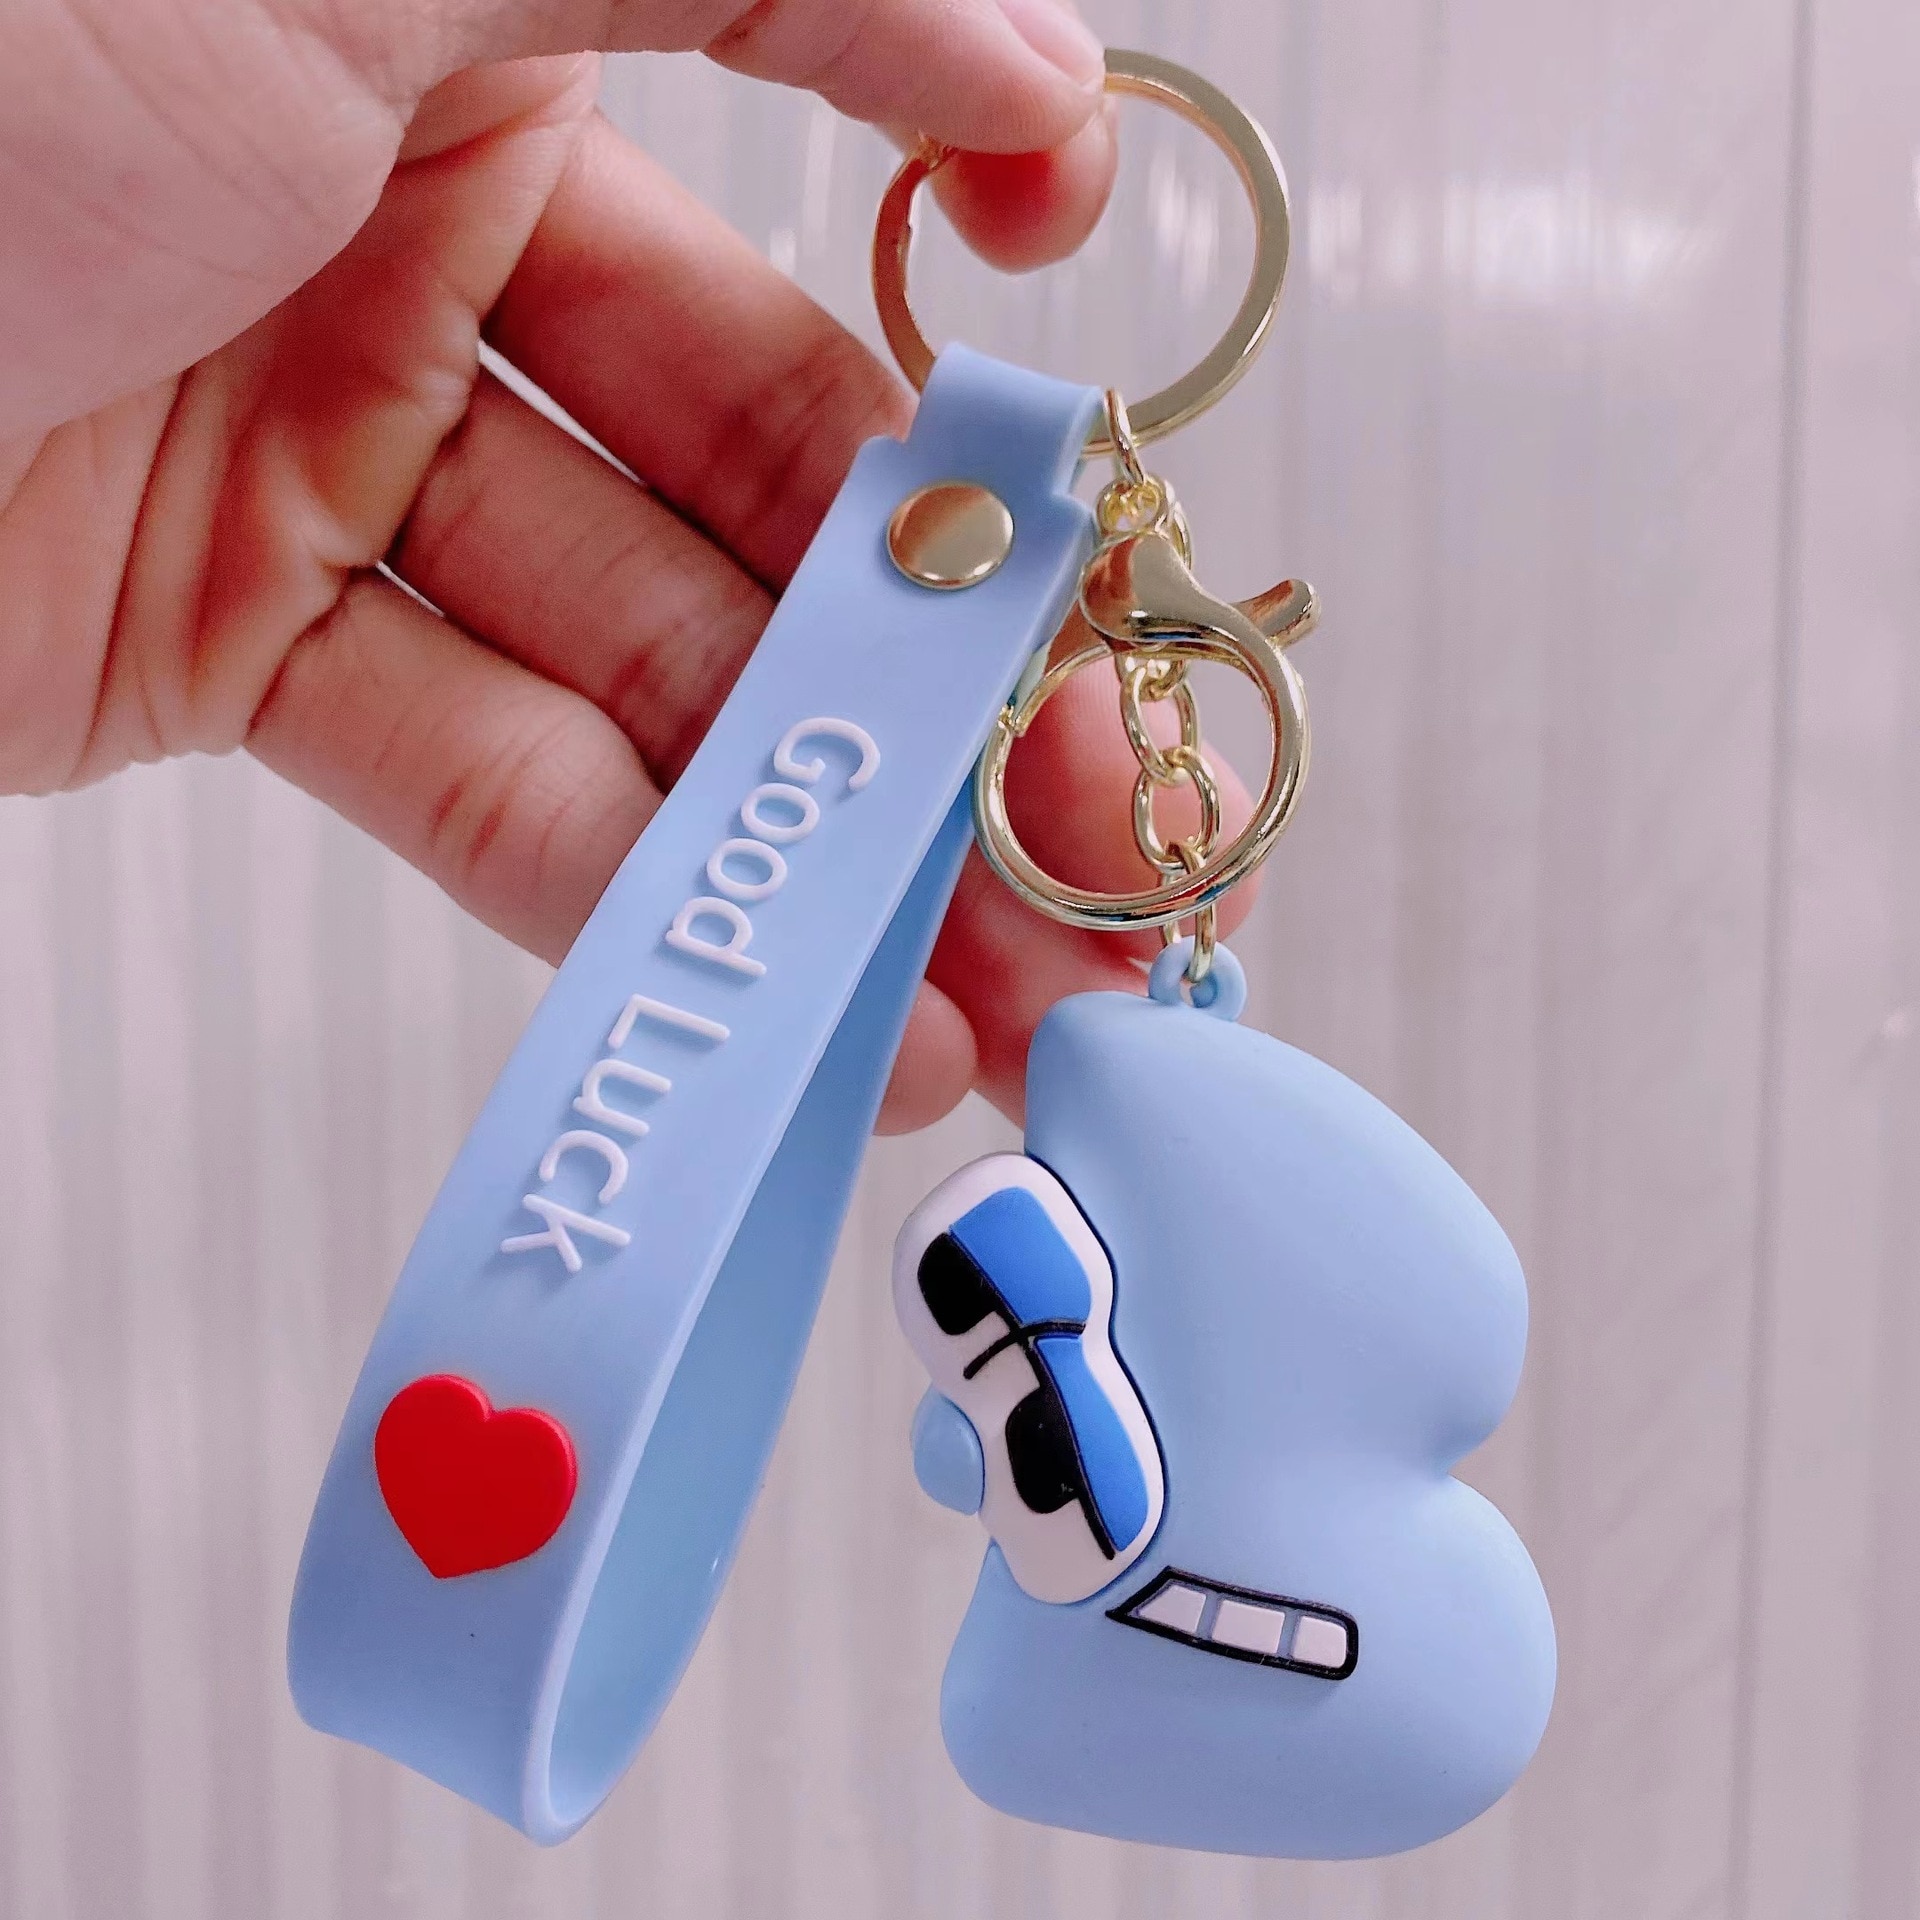 Alphabet Lore Keychain Toys English Letter Animal Doll Toys Gift for Kids Children Educational Alphabet Lore 4 - Alphabet Lore Plush